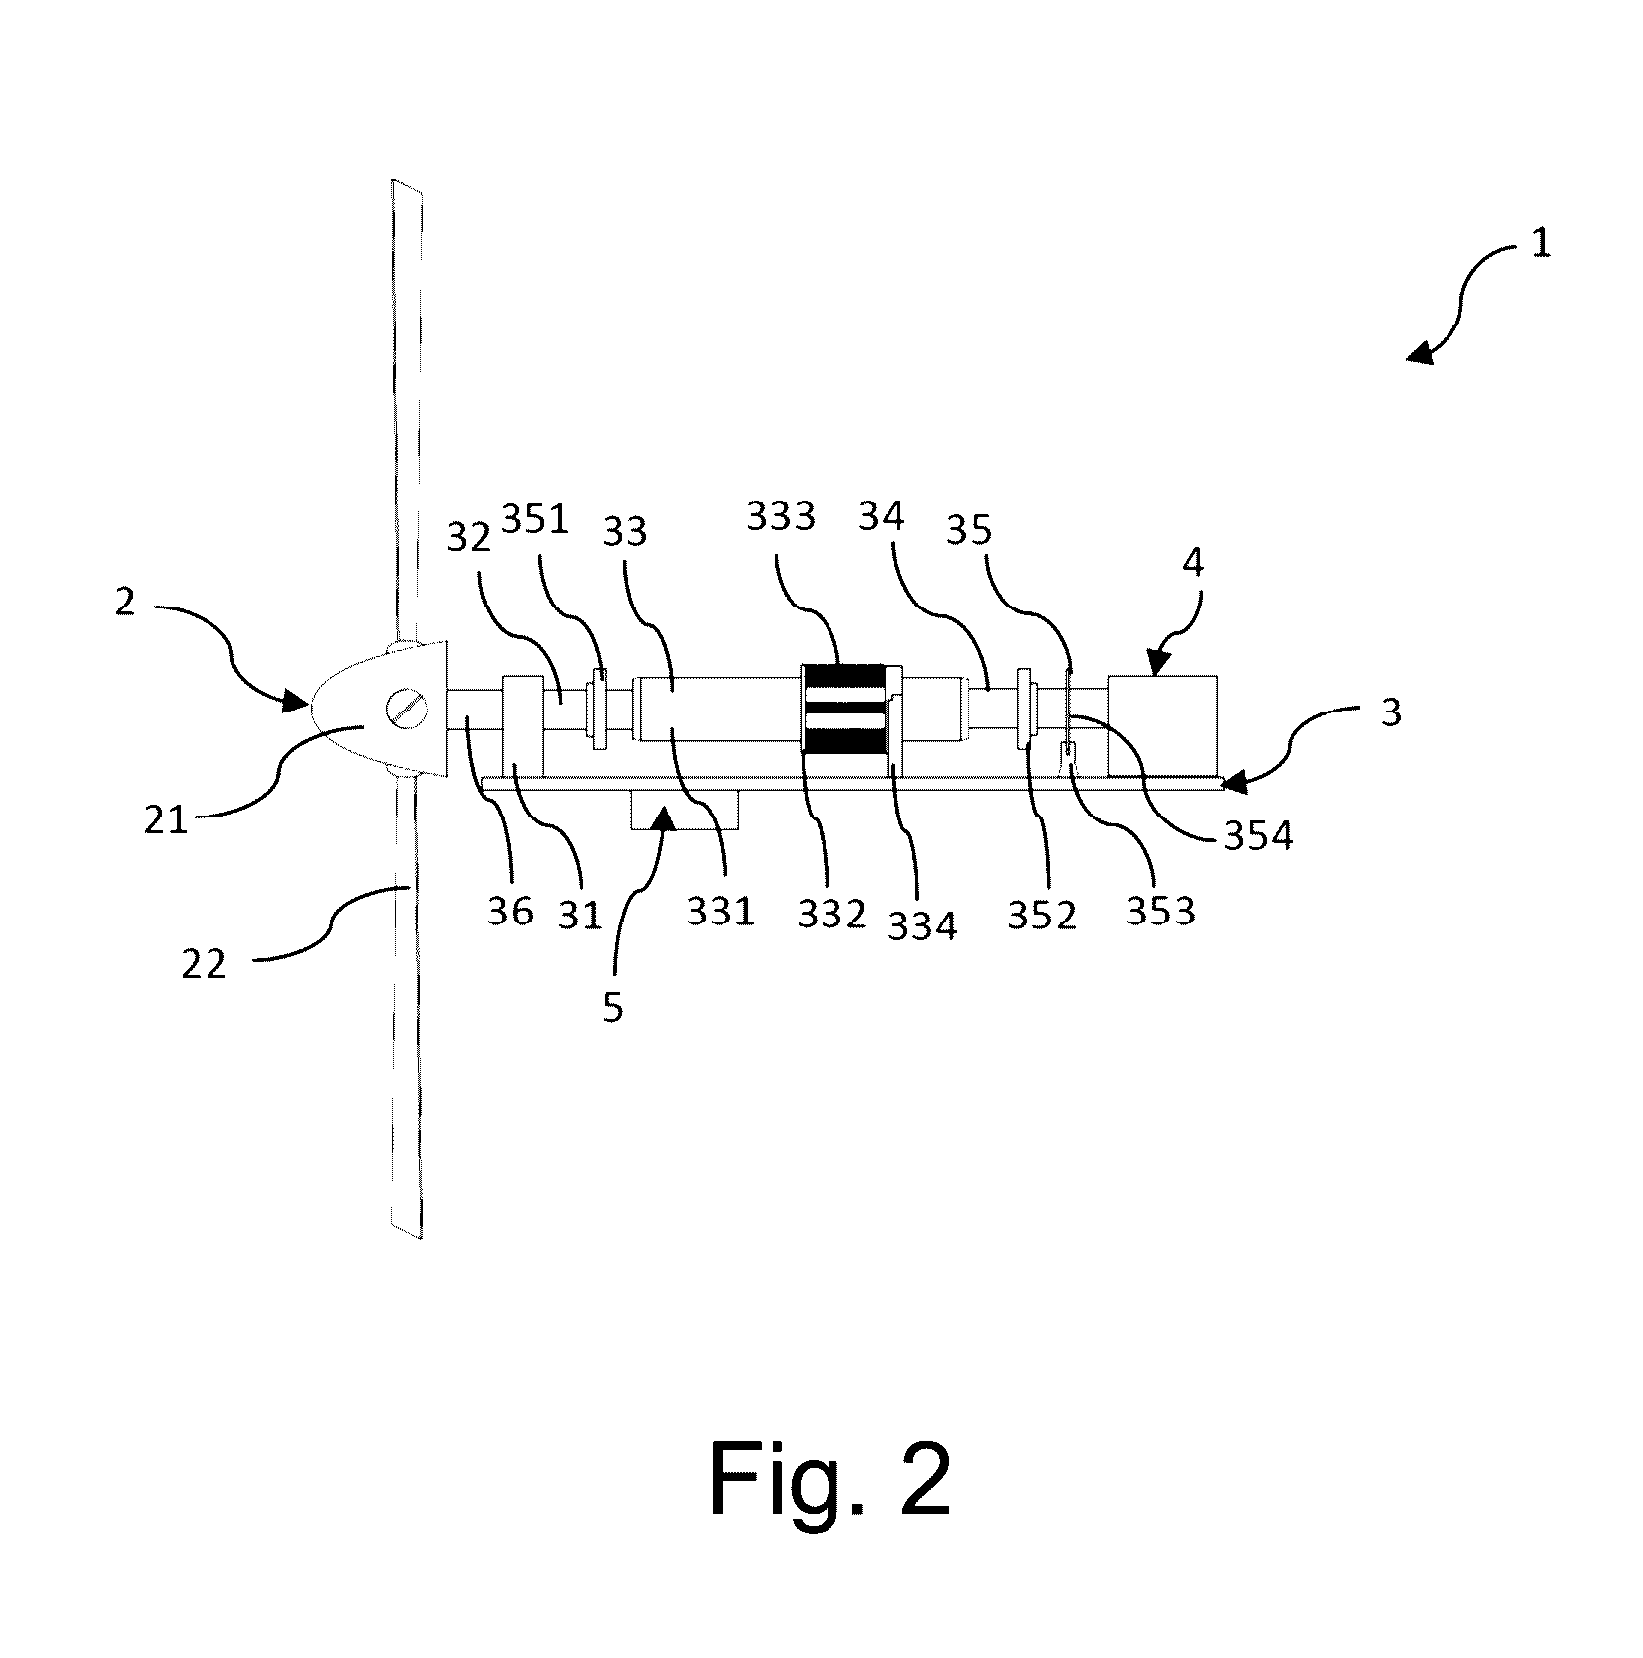 Device for controlling torque output of wind turbine blades